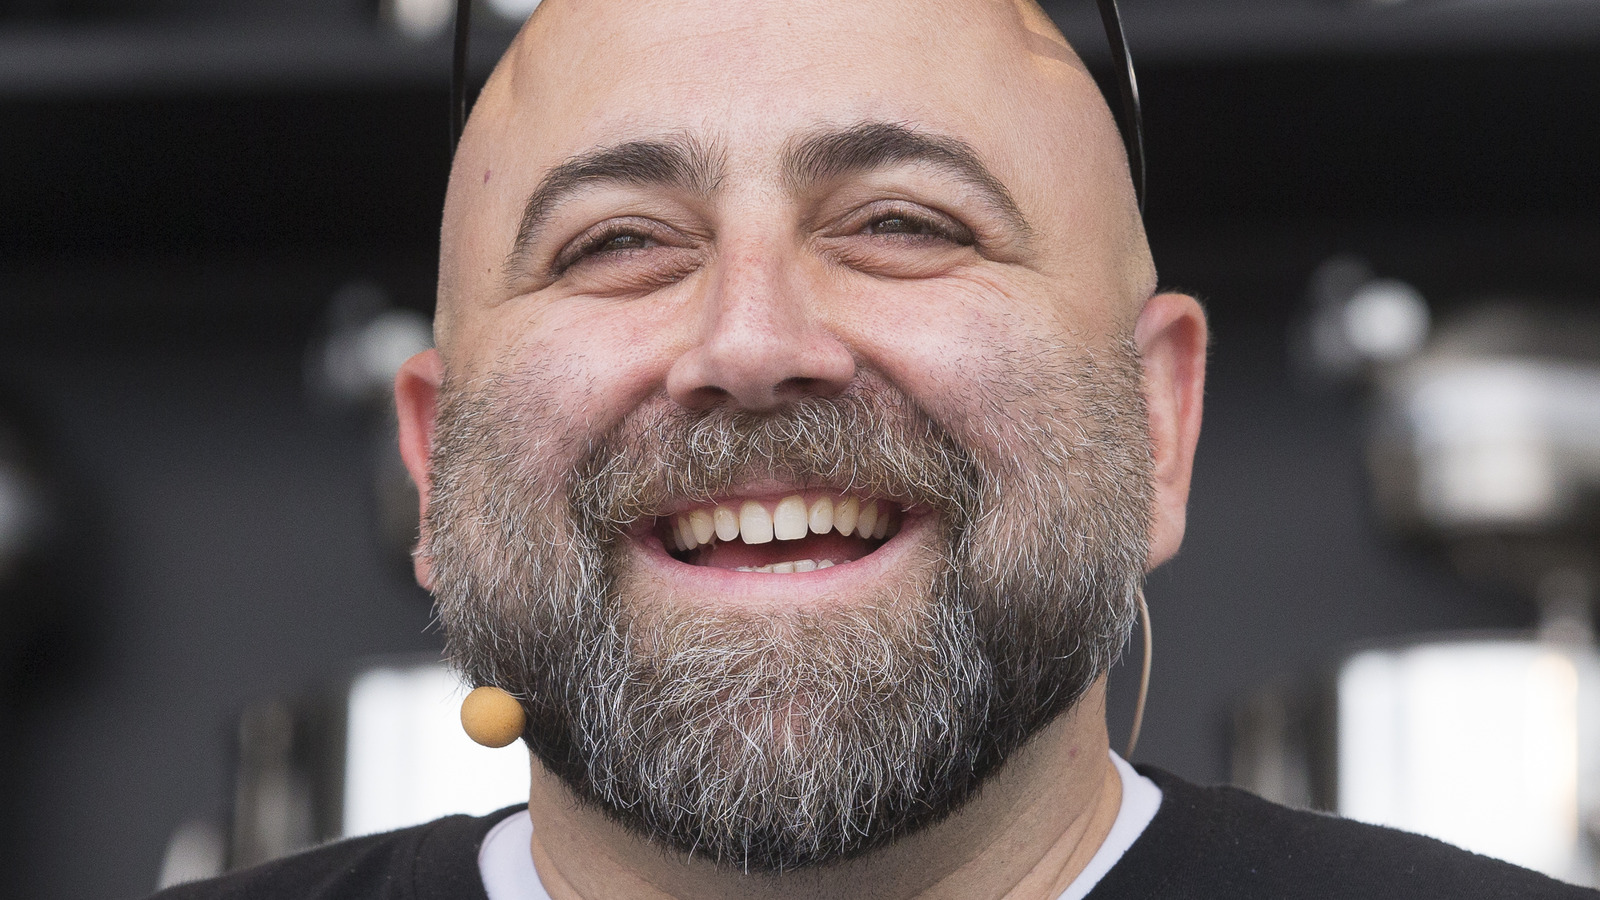 Duff Goldman Wants To Make This Career Change After TV